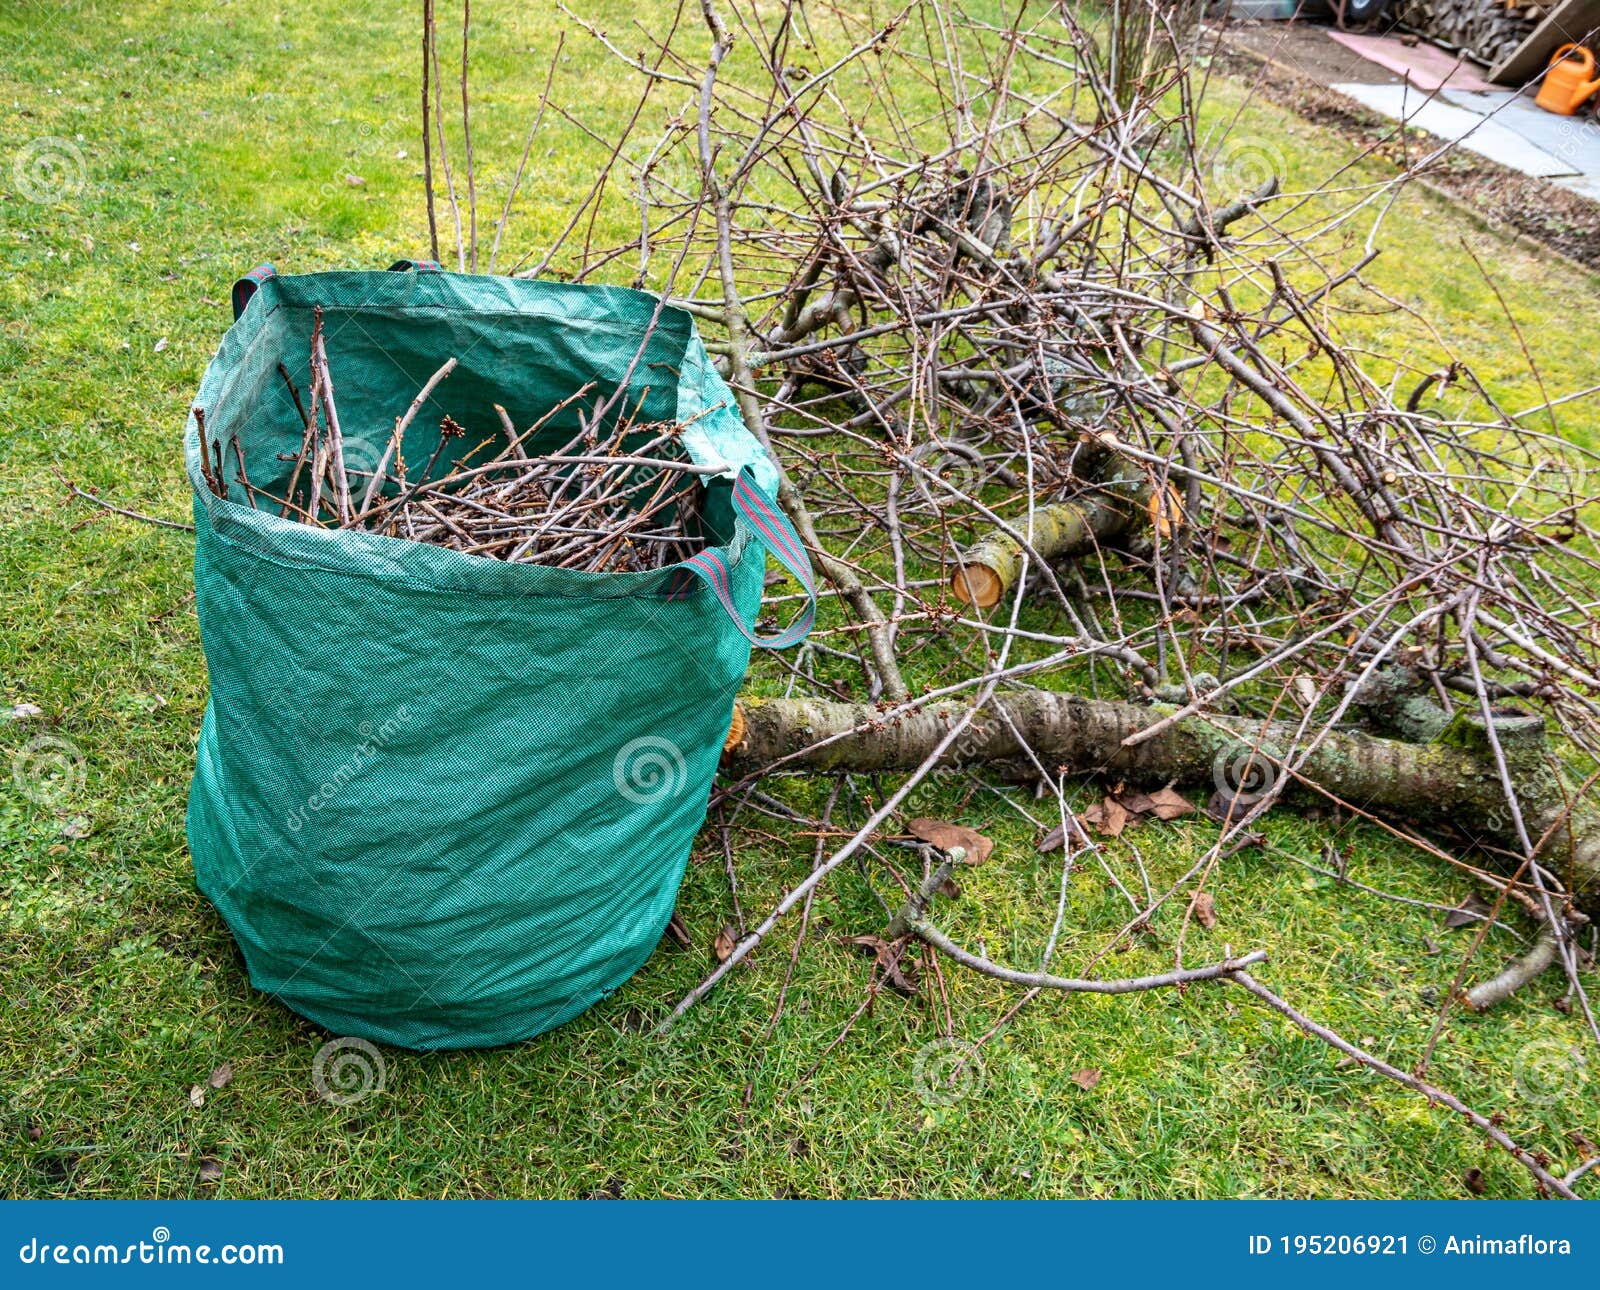 Tree Pruning in the Garden Green Waste Stock Image - Image of .